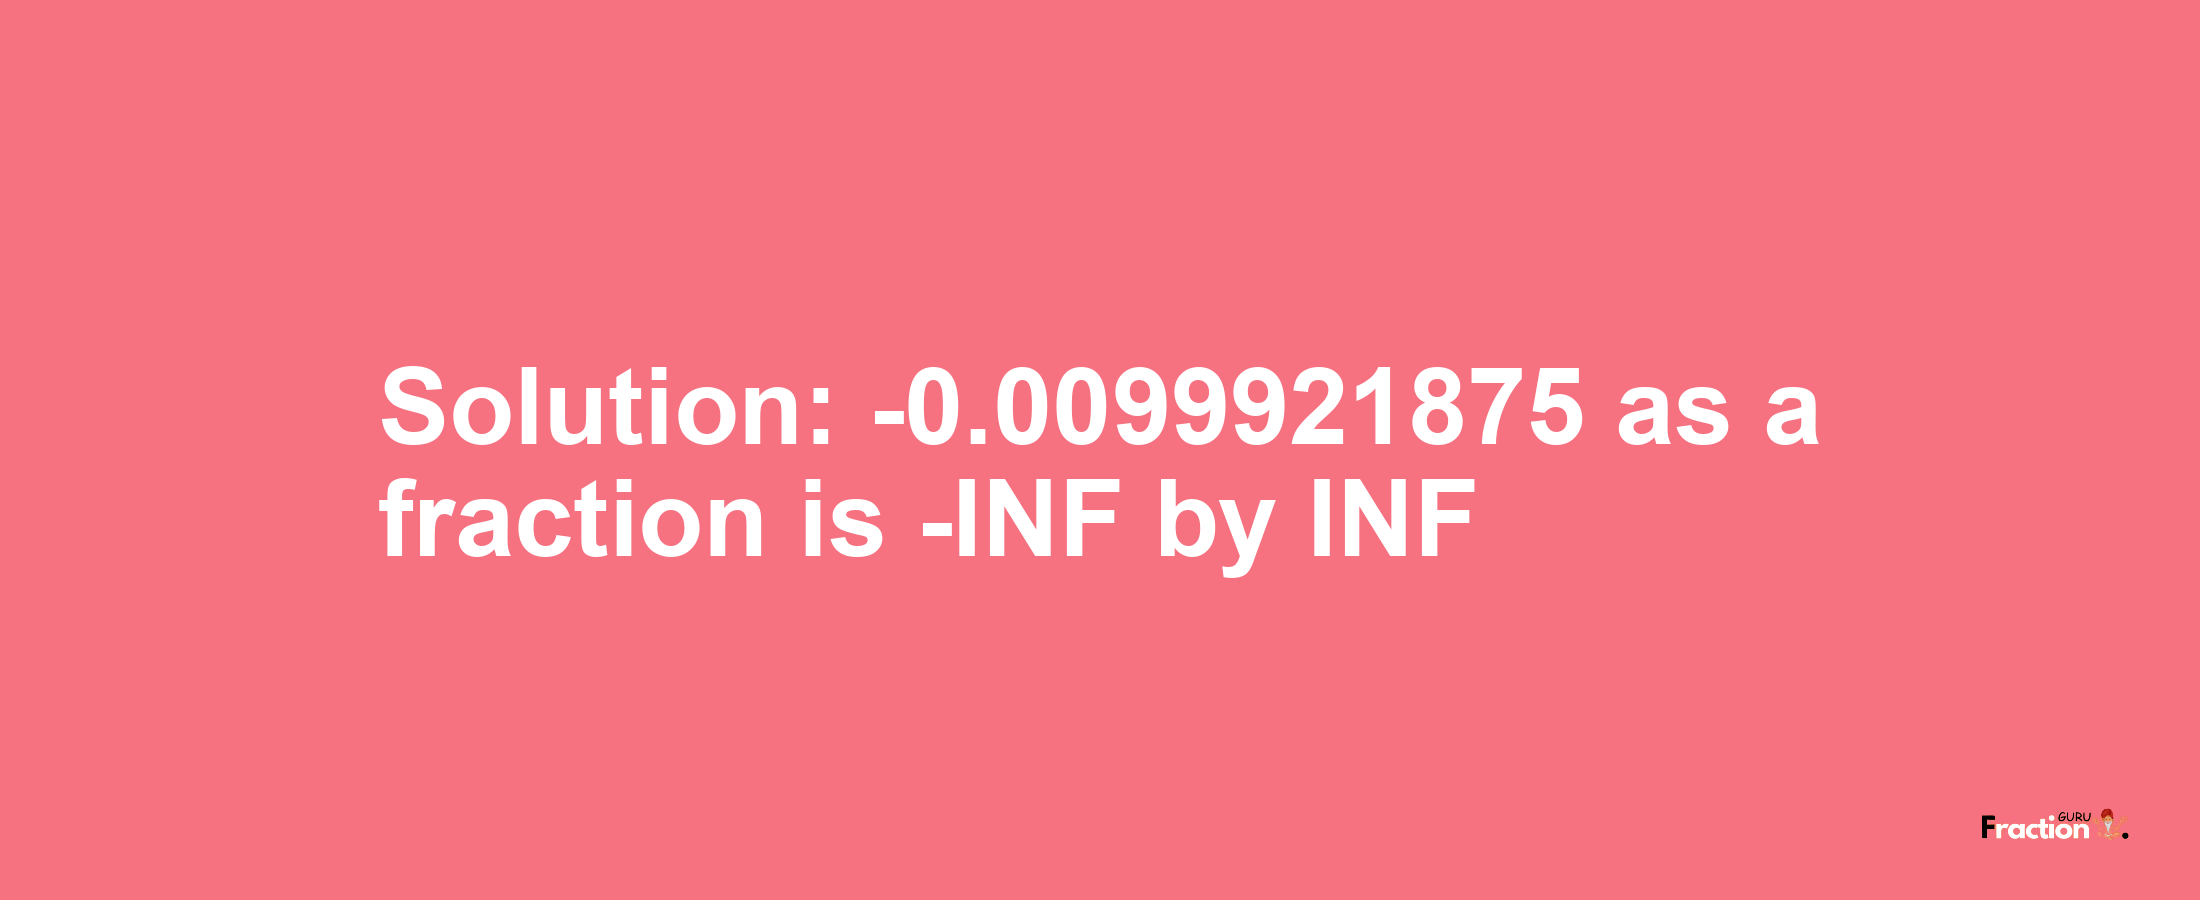 Solution:-0.0099921875 as a fraction is -INF/INF